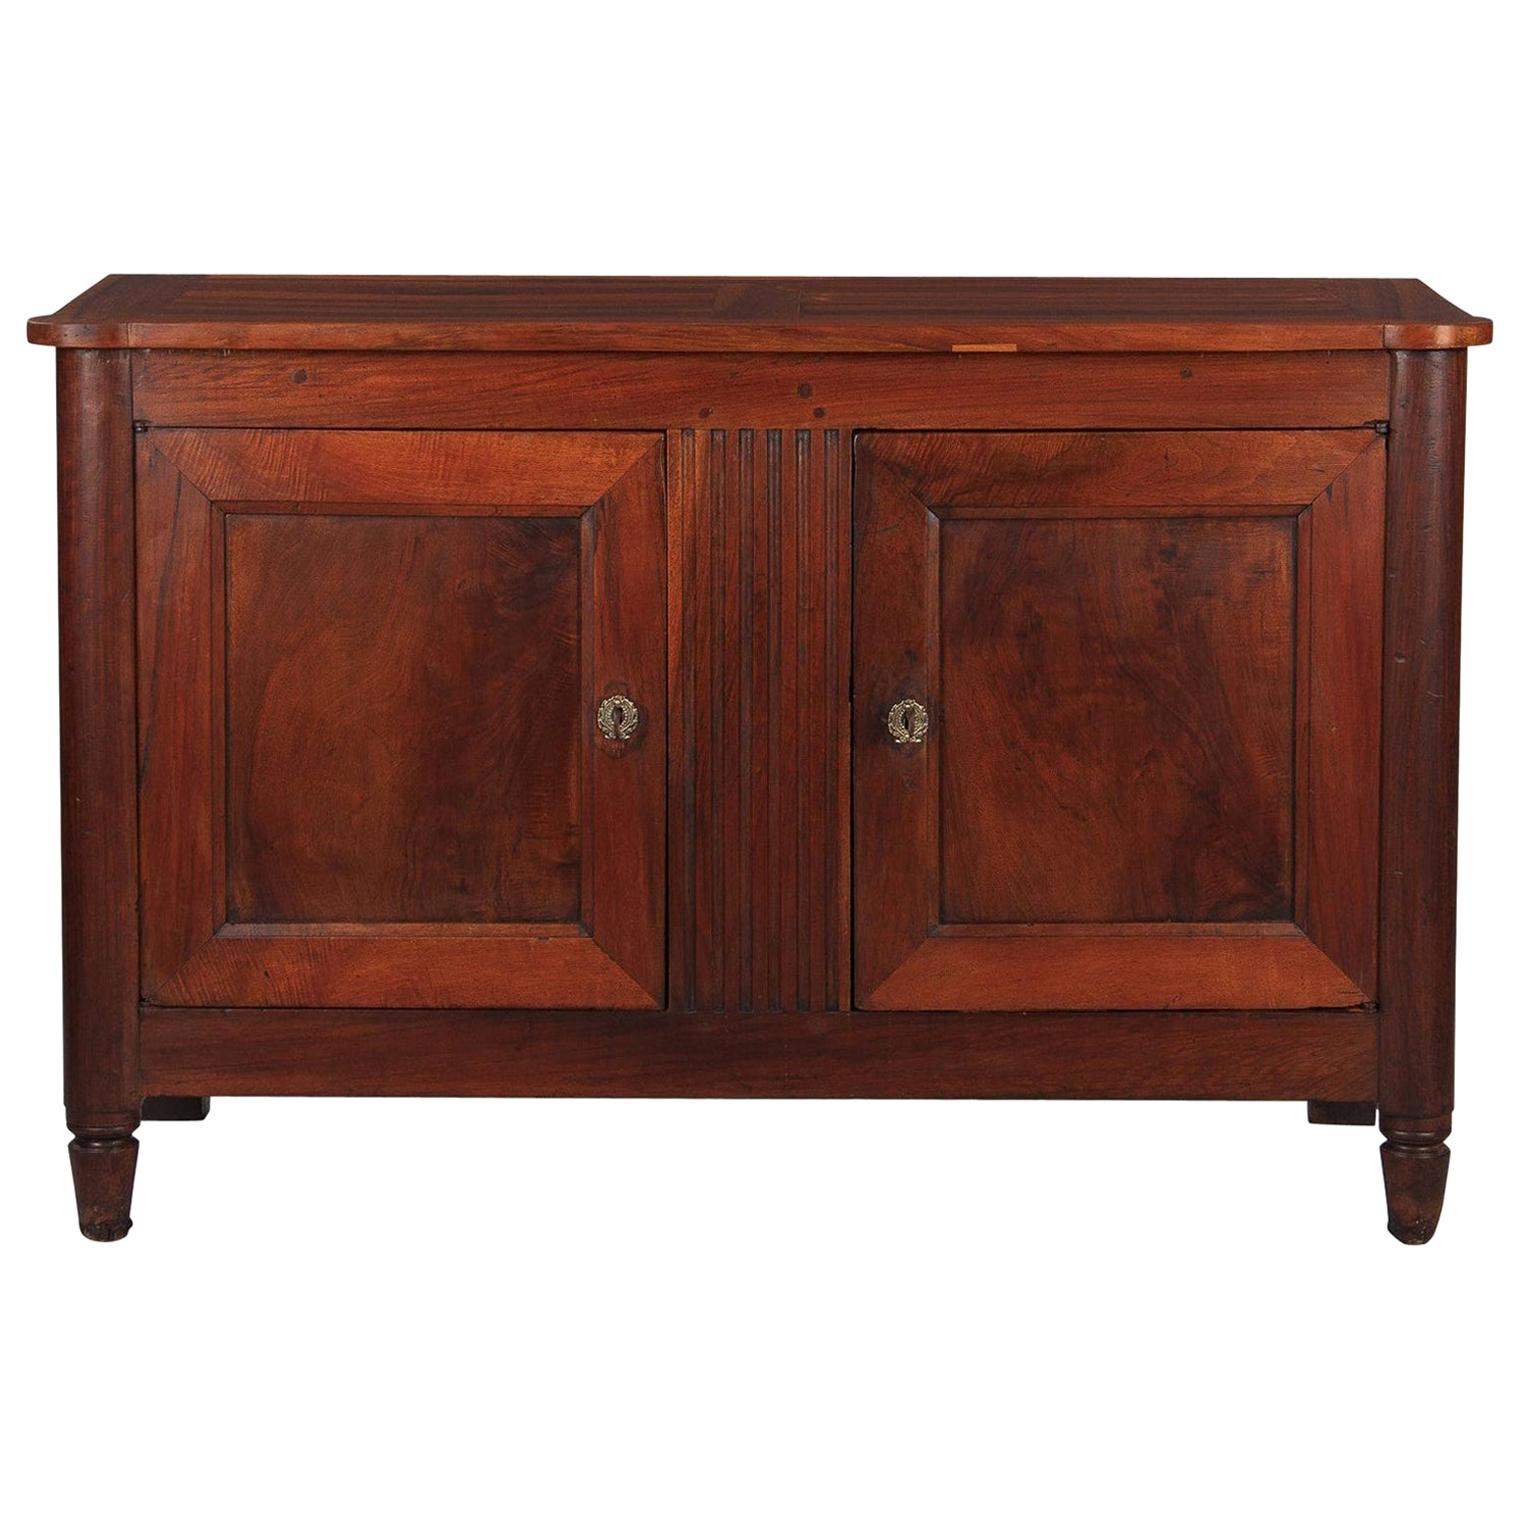 French Louis XVI Style Cherrywood Buffet, 19th Century